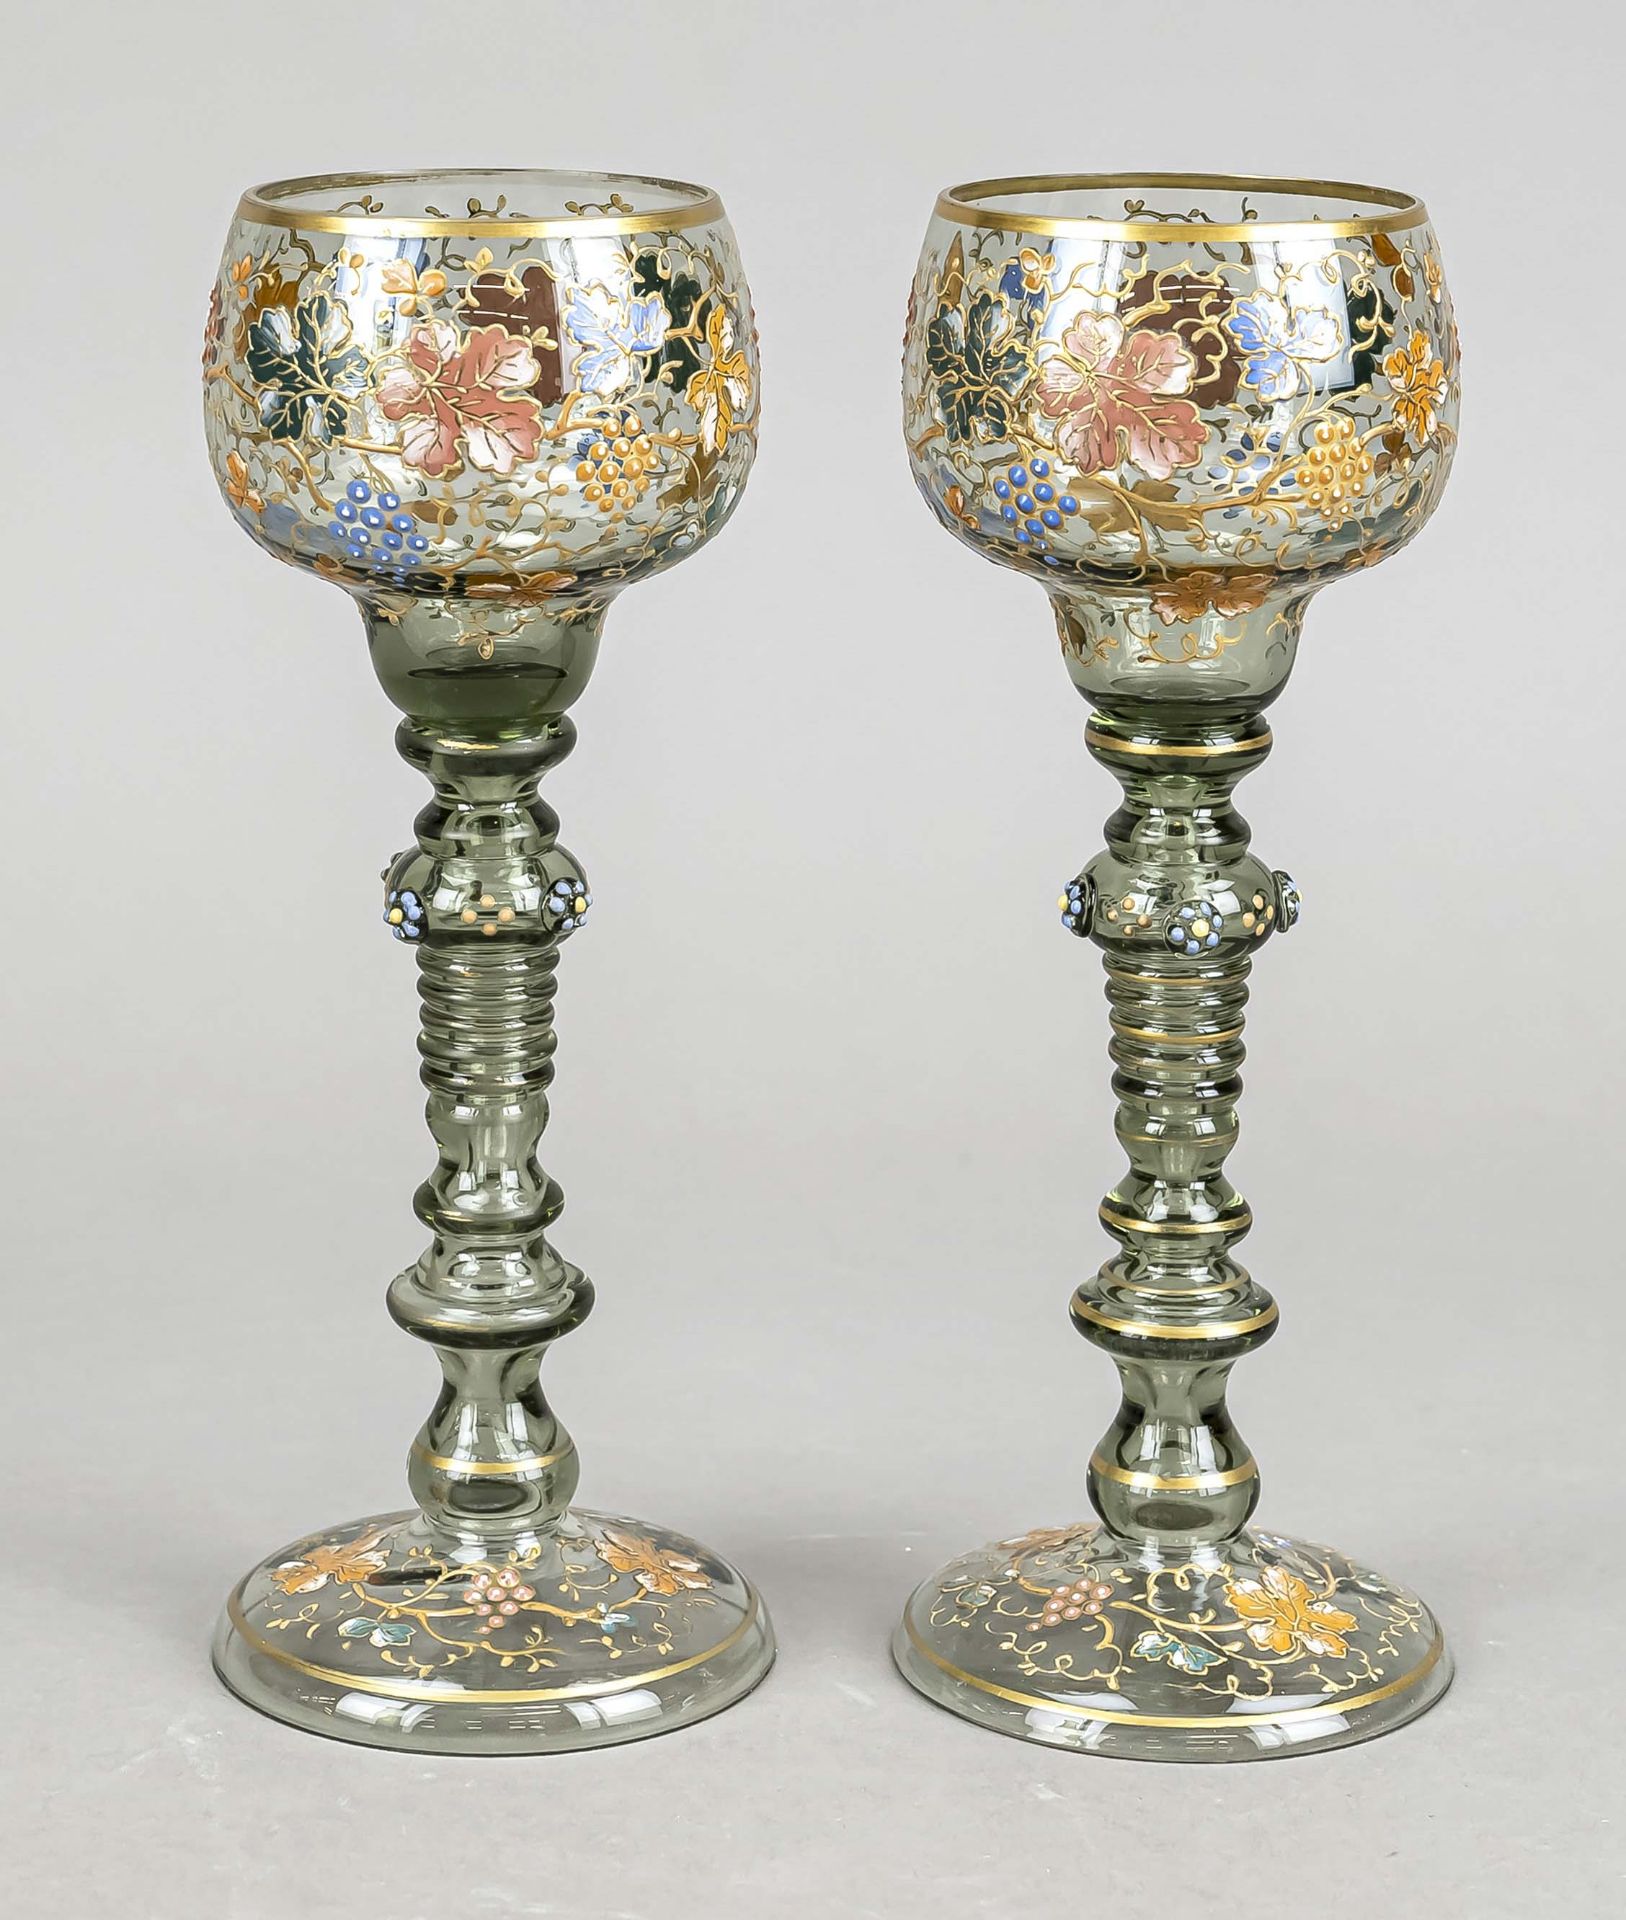 Pair of Art Nouveau roman, c. 1900, round domed stand, hollow baluster stem, spherical dome, gray